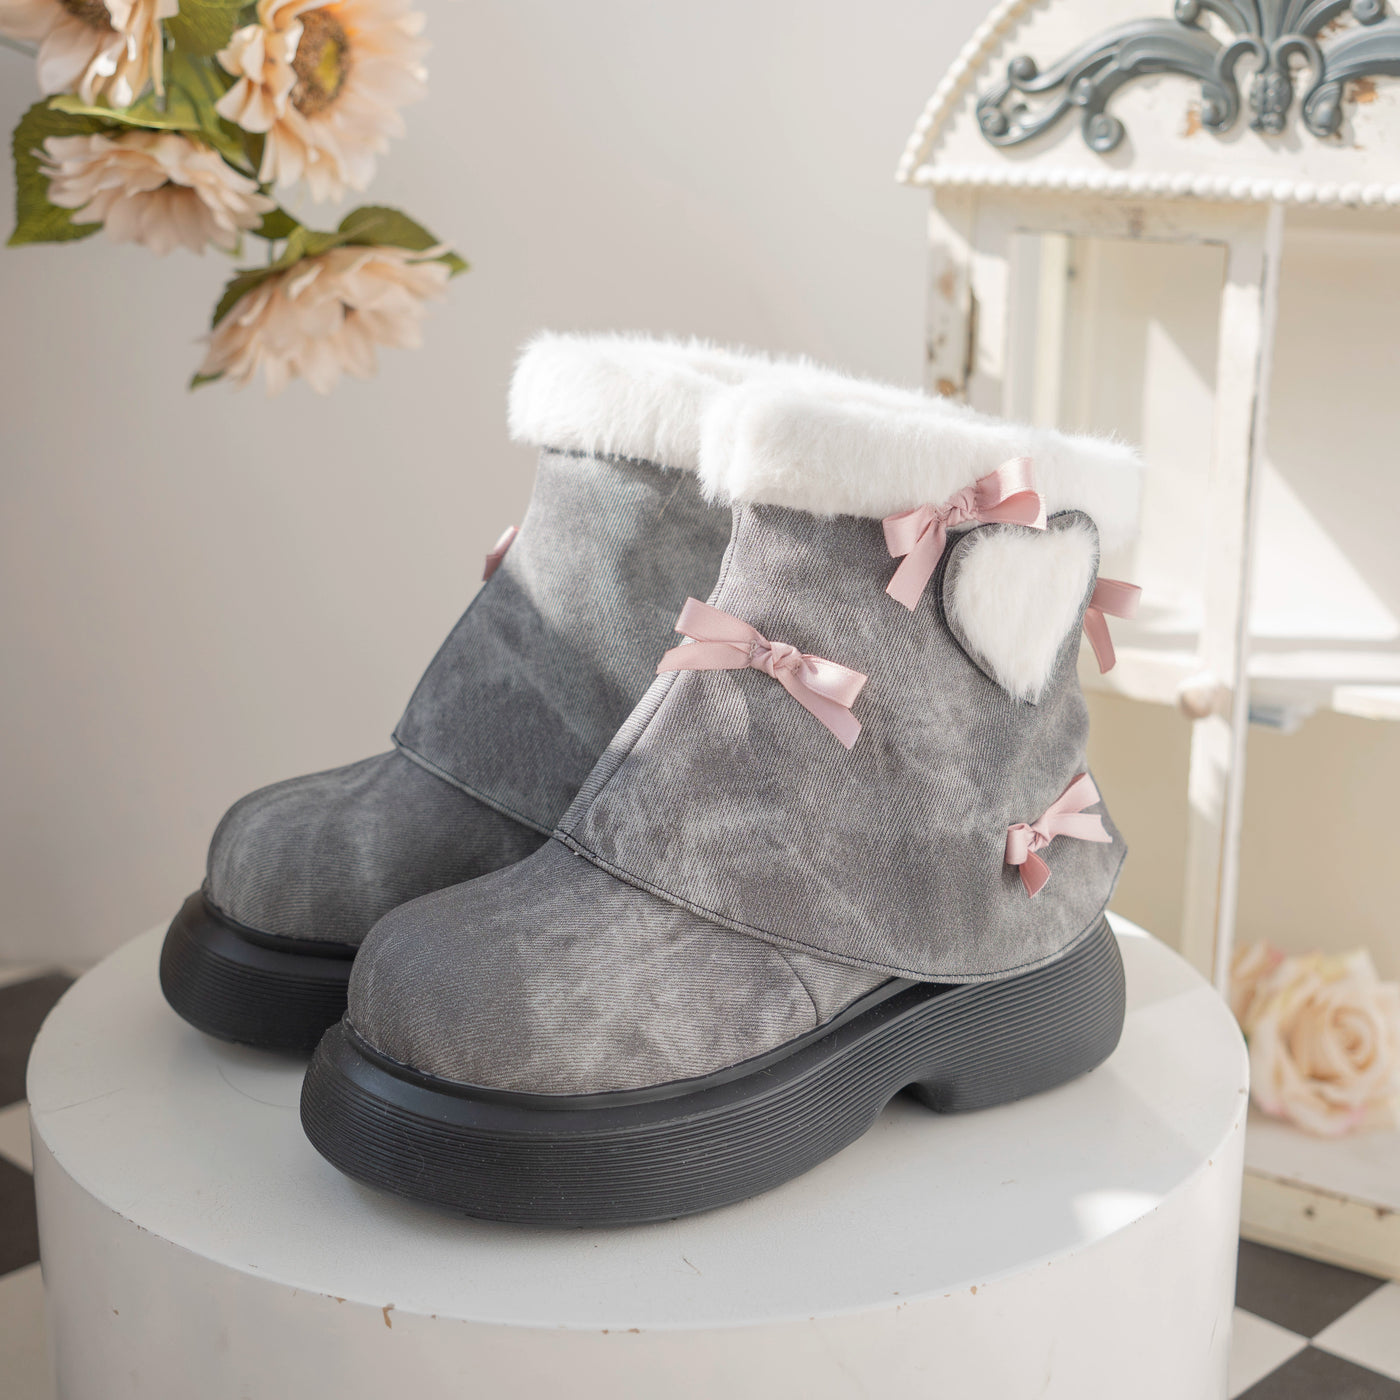 Dolly Doll~Ponyo~Winter Casual Lolita Boots Bow Thick Sole Shoes 34 Charcoal gray 